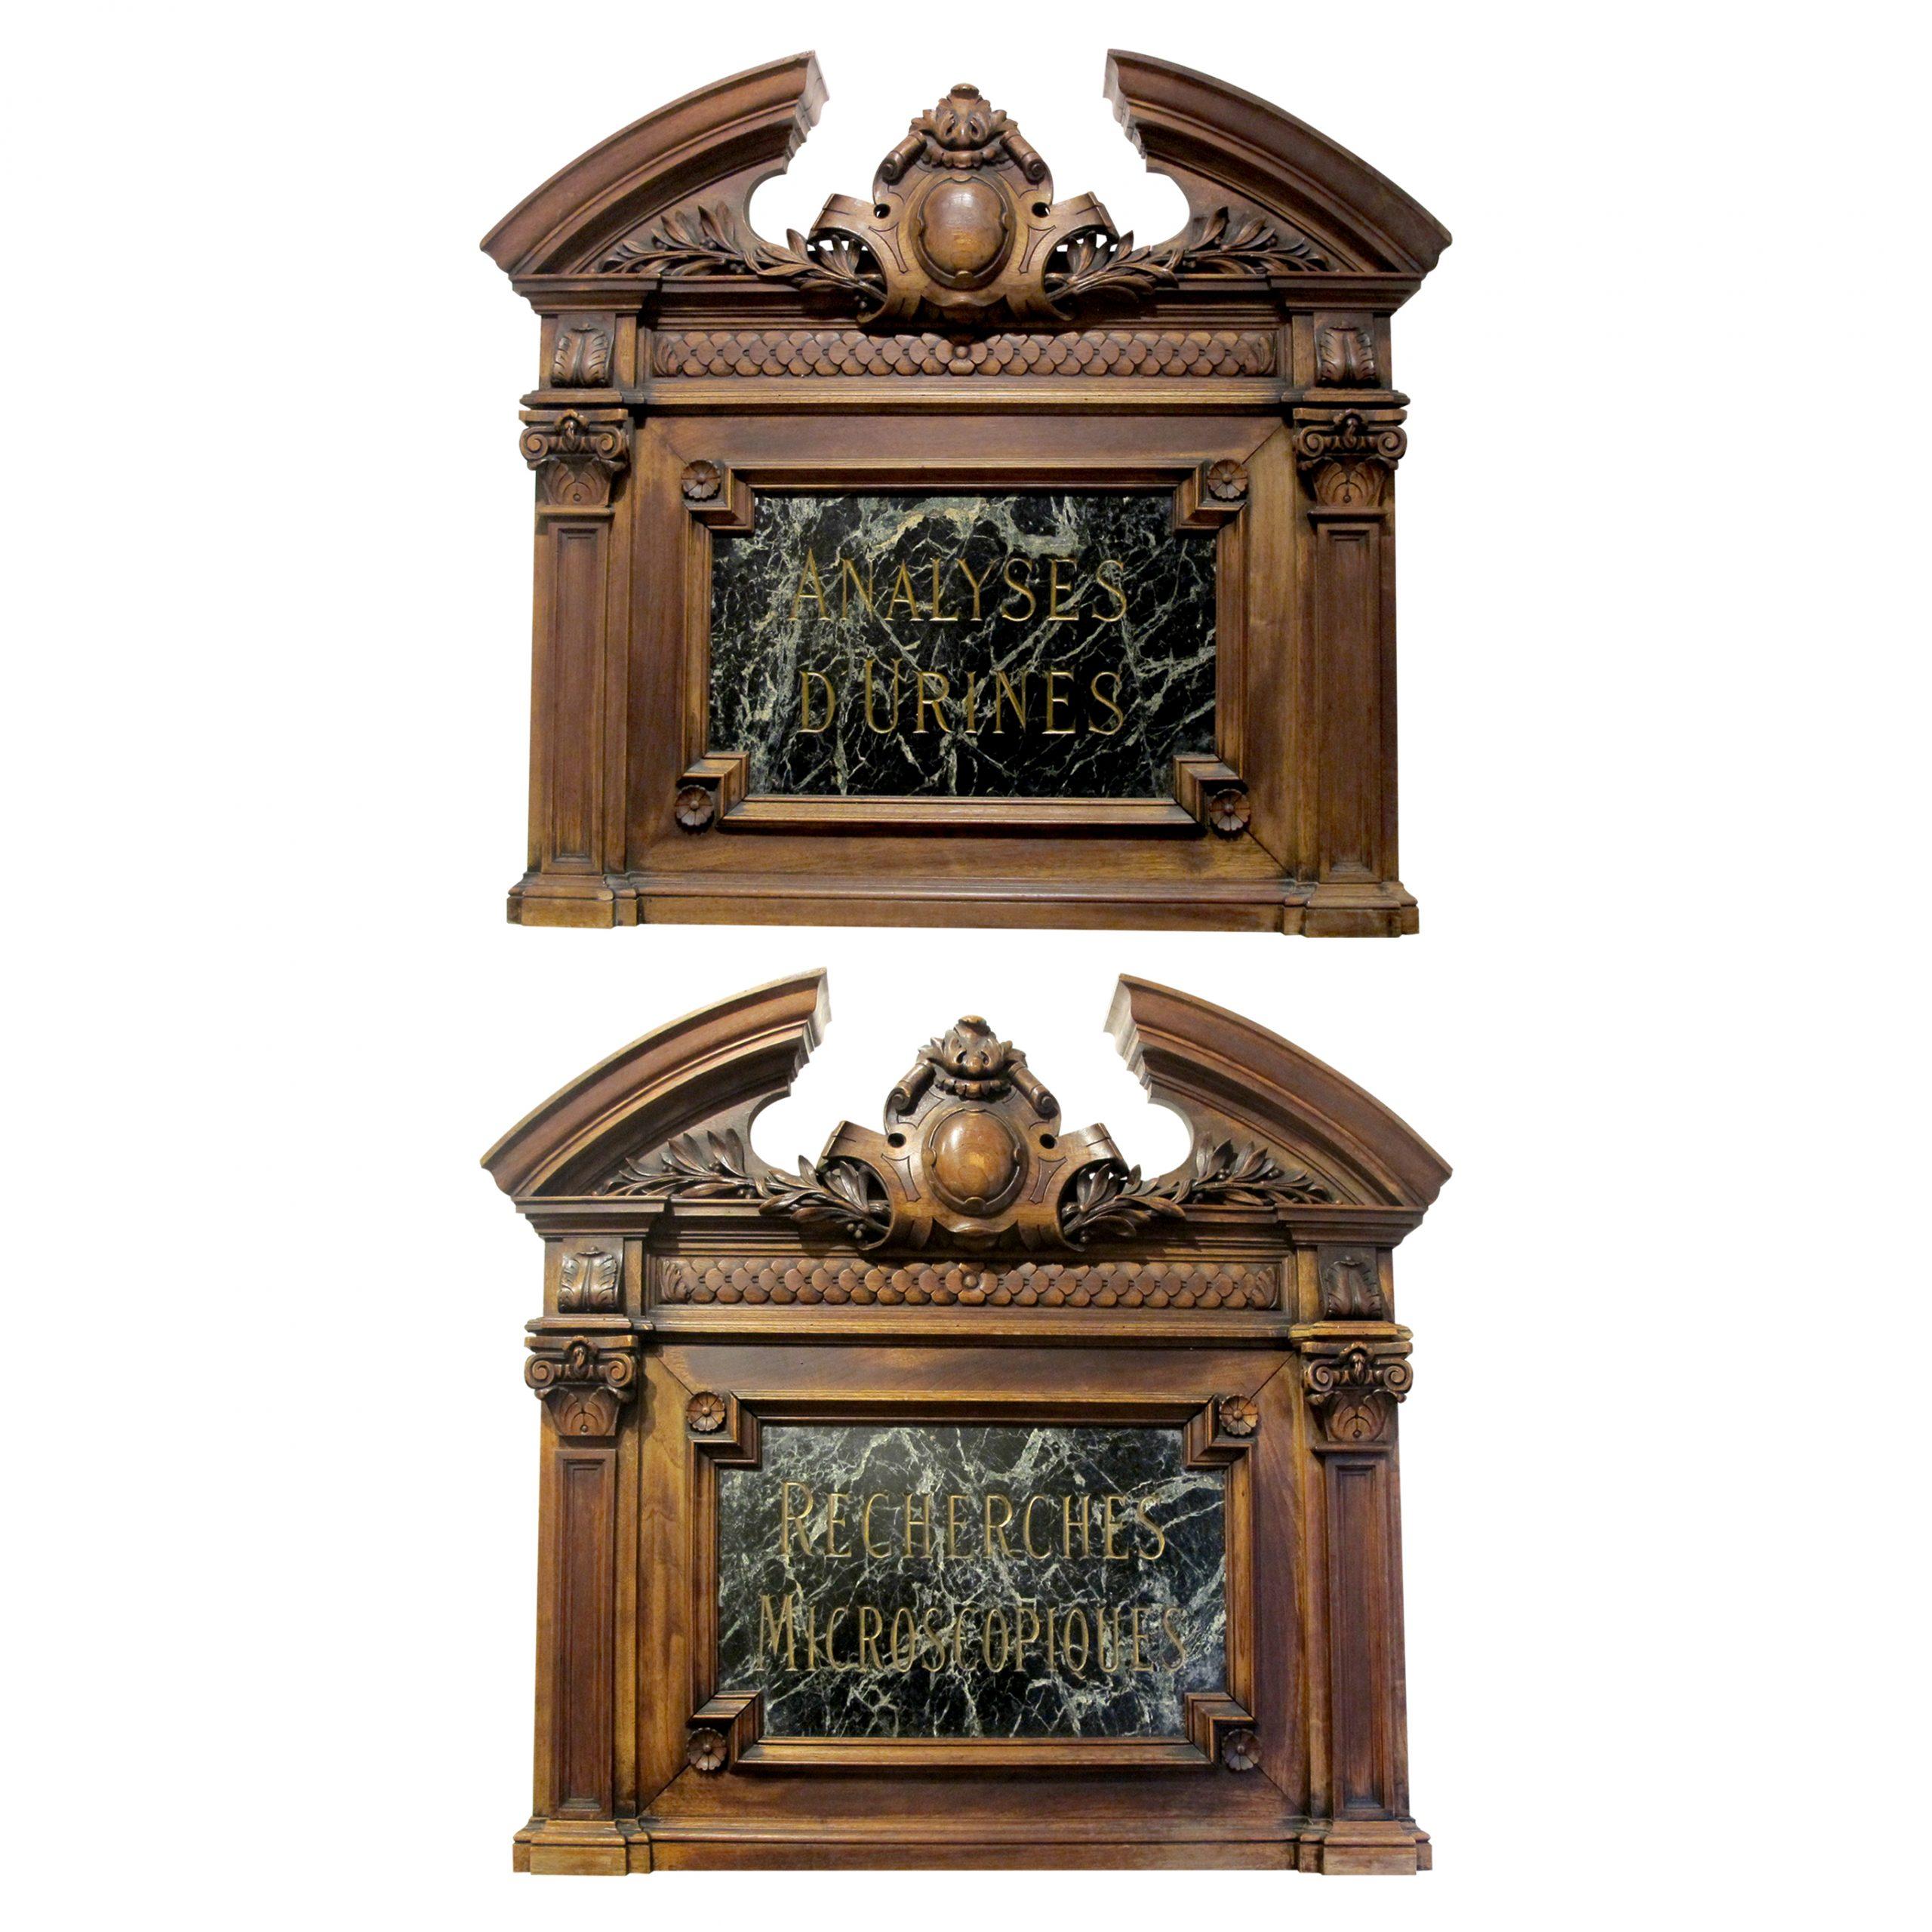 This is a rare pair of oak-carved laboratory pharmacy door pediments, late 19th Century French.
Each pediment has its original green marble engraved with gilt letters “ANALYSES D’URINES” (Urine analysis) and “RECHERCHES MICROSCOPIQUES” (Microscopic